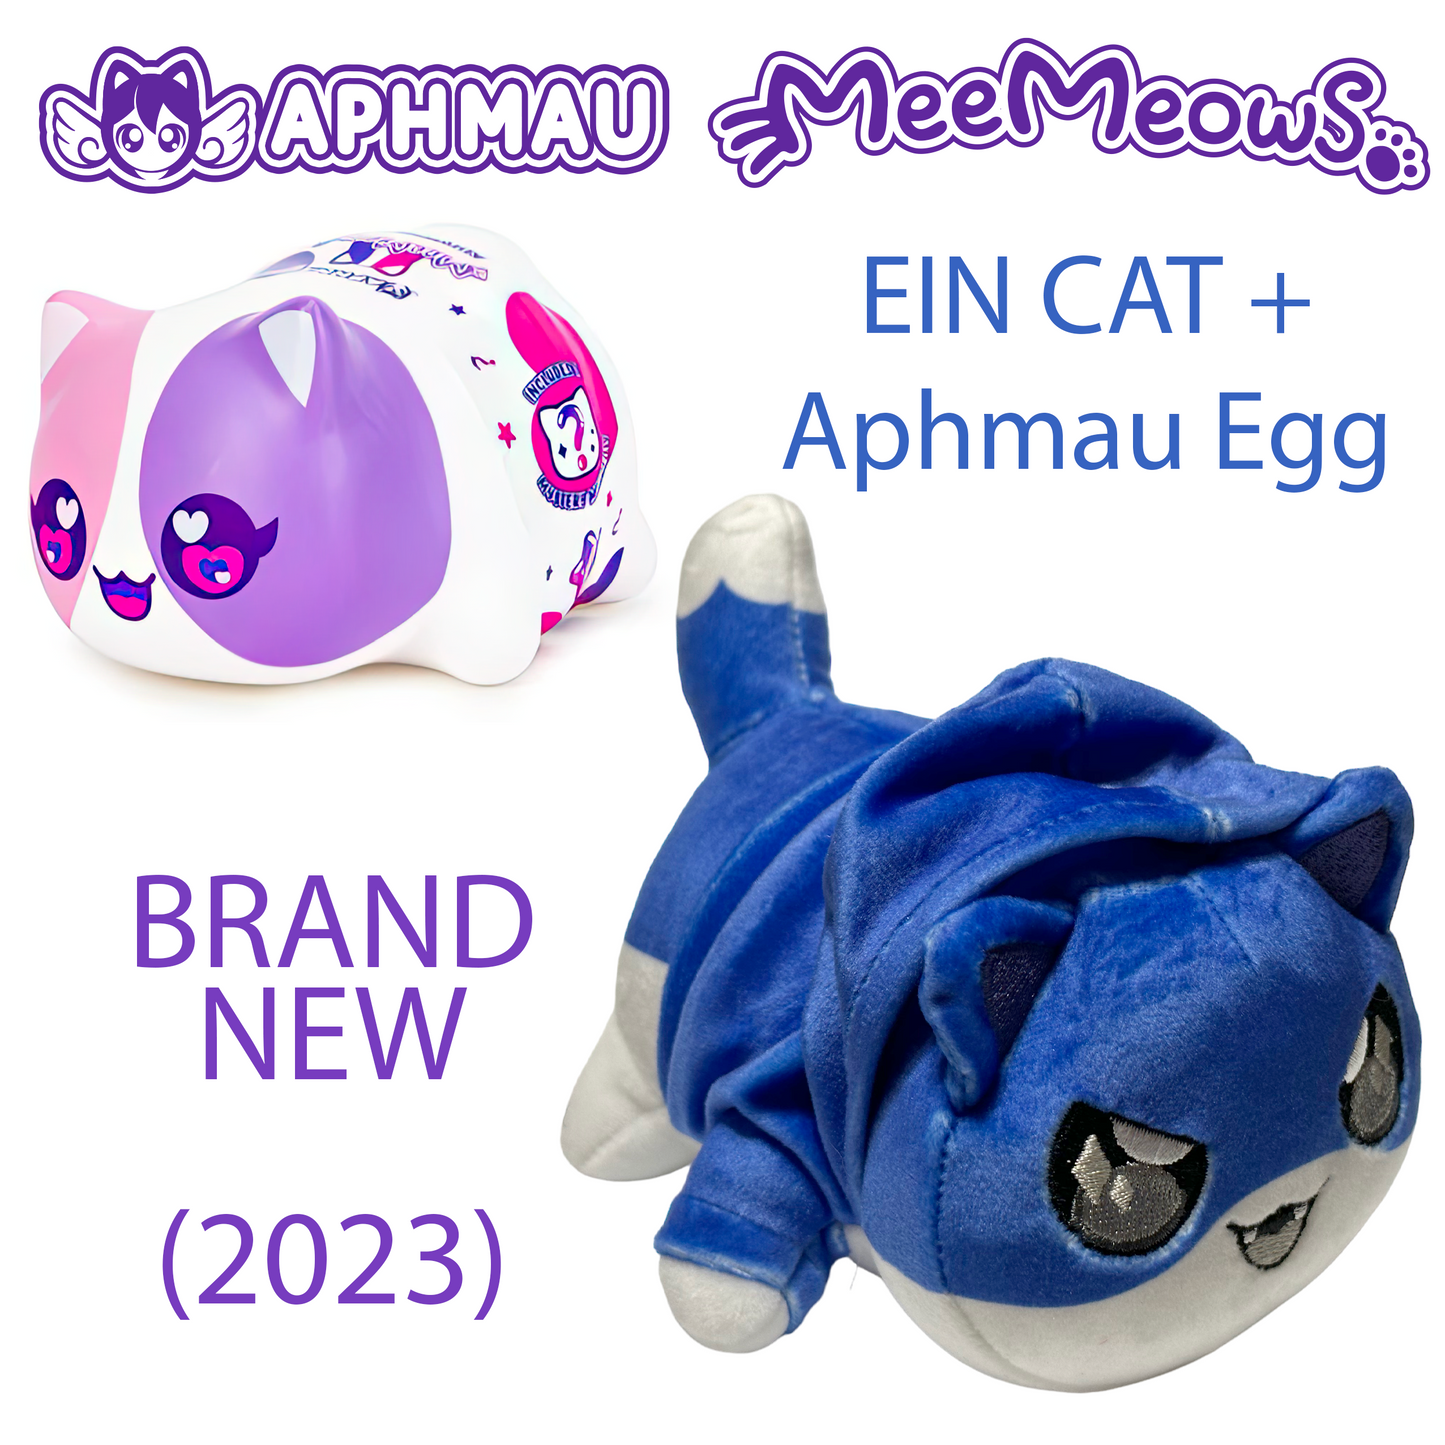 EIN CAT - Aphmau & Friends Mystery Egg (NEW) Online Exclusive Kitty Plush!